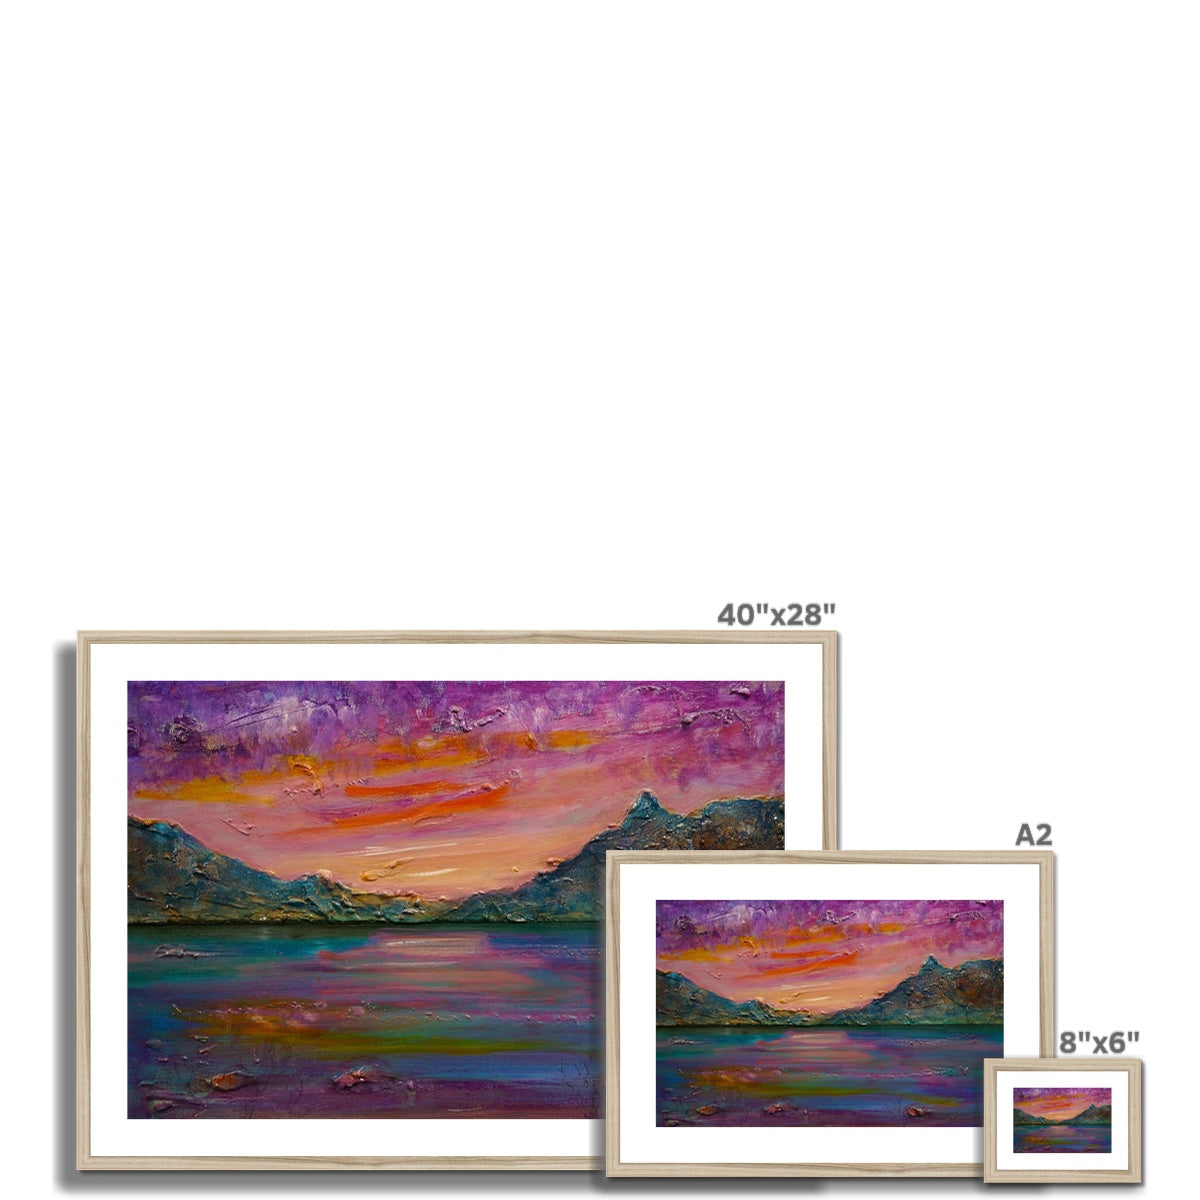 Loch Leven Sunset Painting | Framed & Mounted Prints From Scotland-Framed & Mounted Prints-Scottish Lochs & Mountains Art Gallery-Paintings, Prints, Homeware, Art Gifts From Scotland By Scottish Artist Kevin Hunter